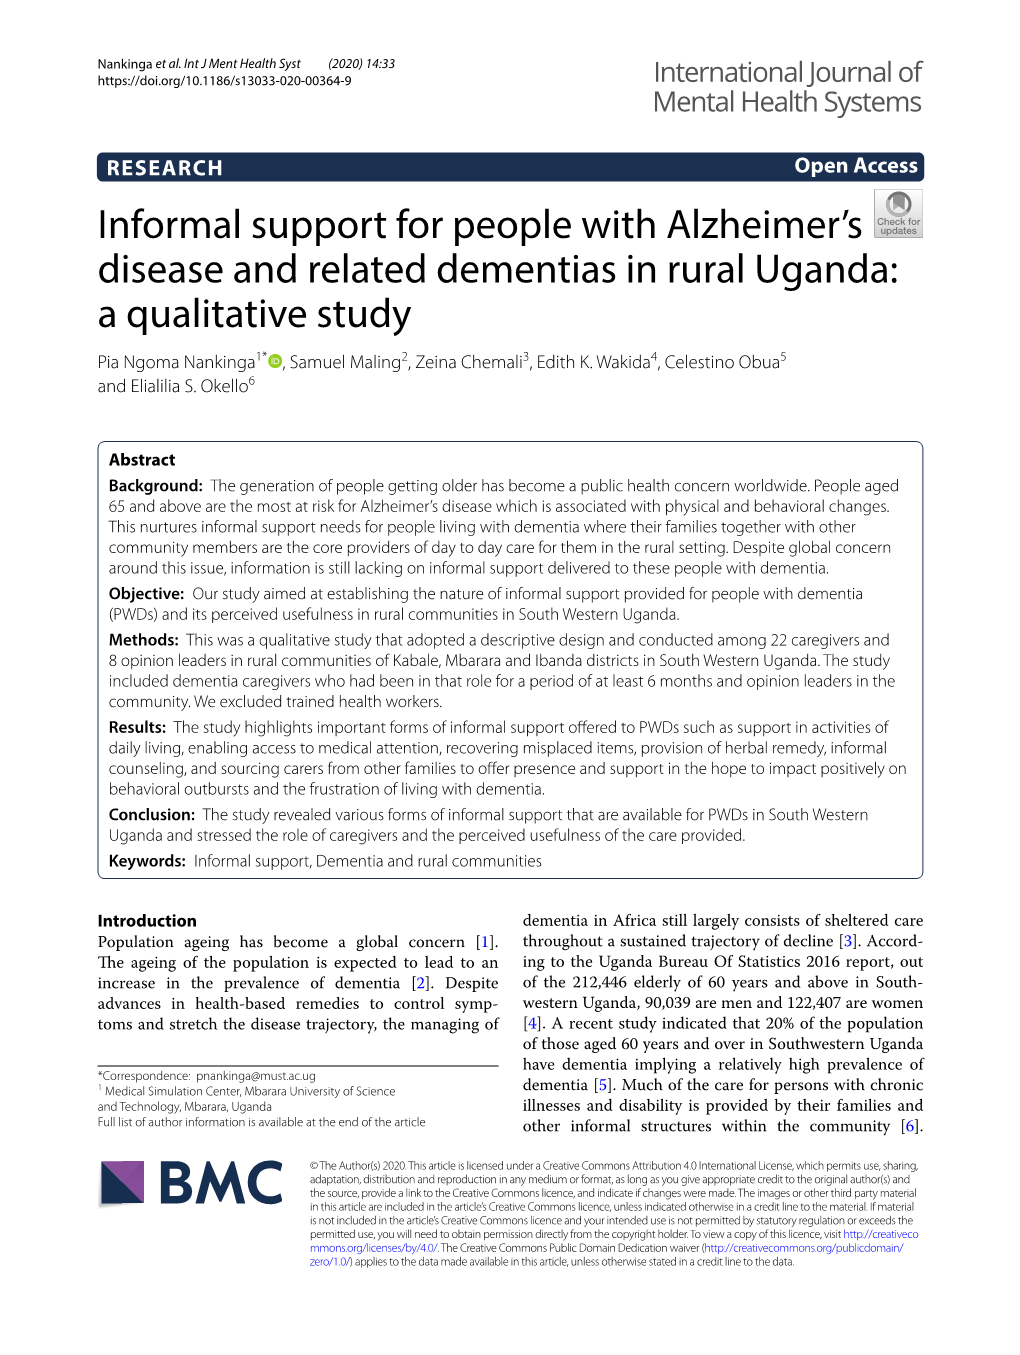 Informal Support for People with Alzheimer's Disease and Related